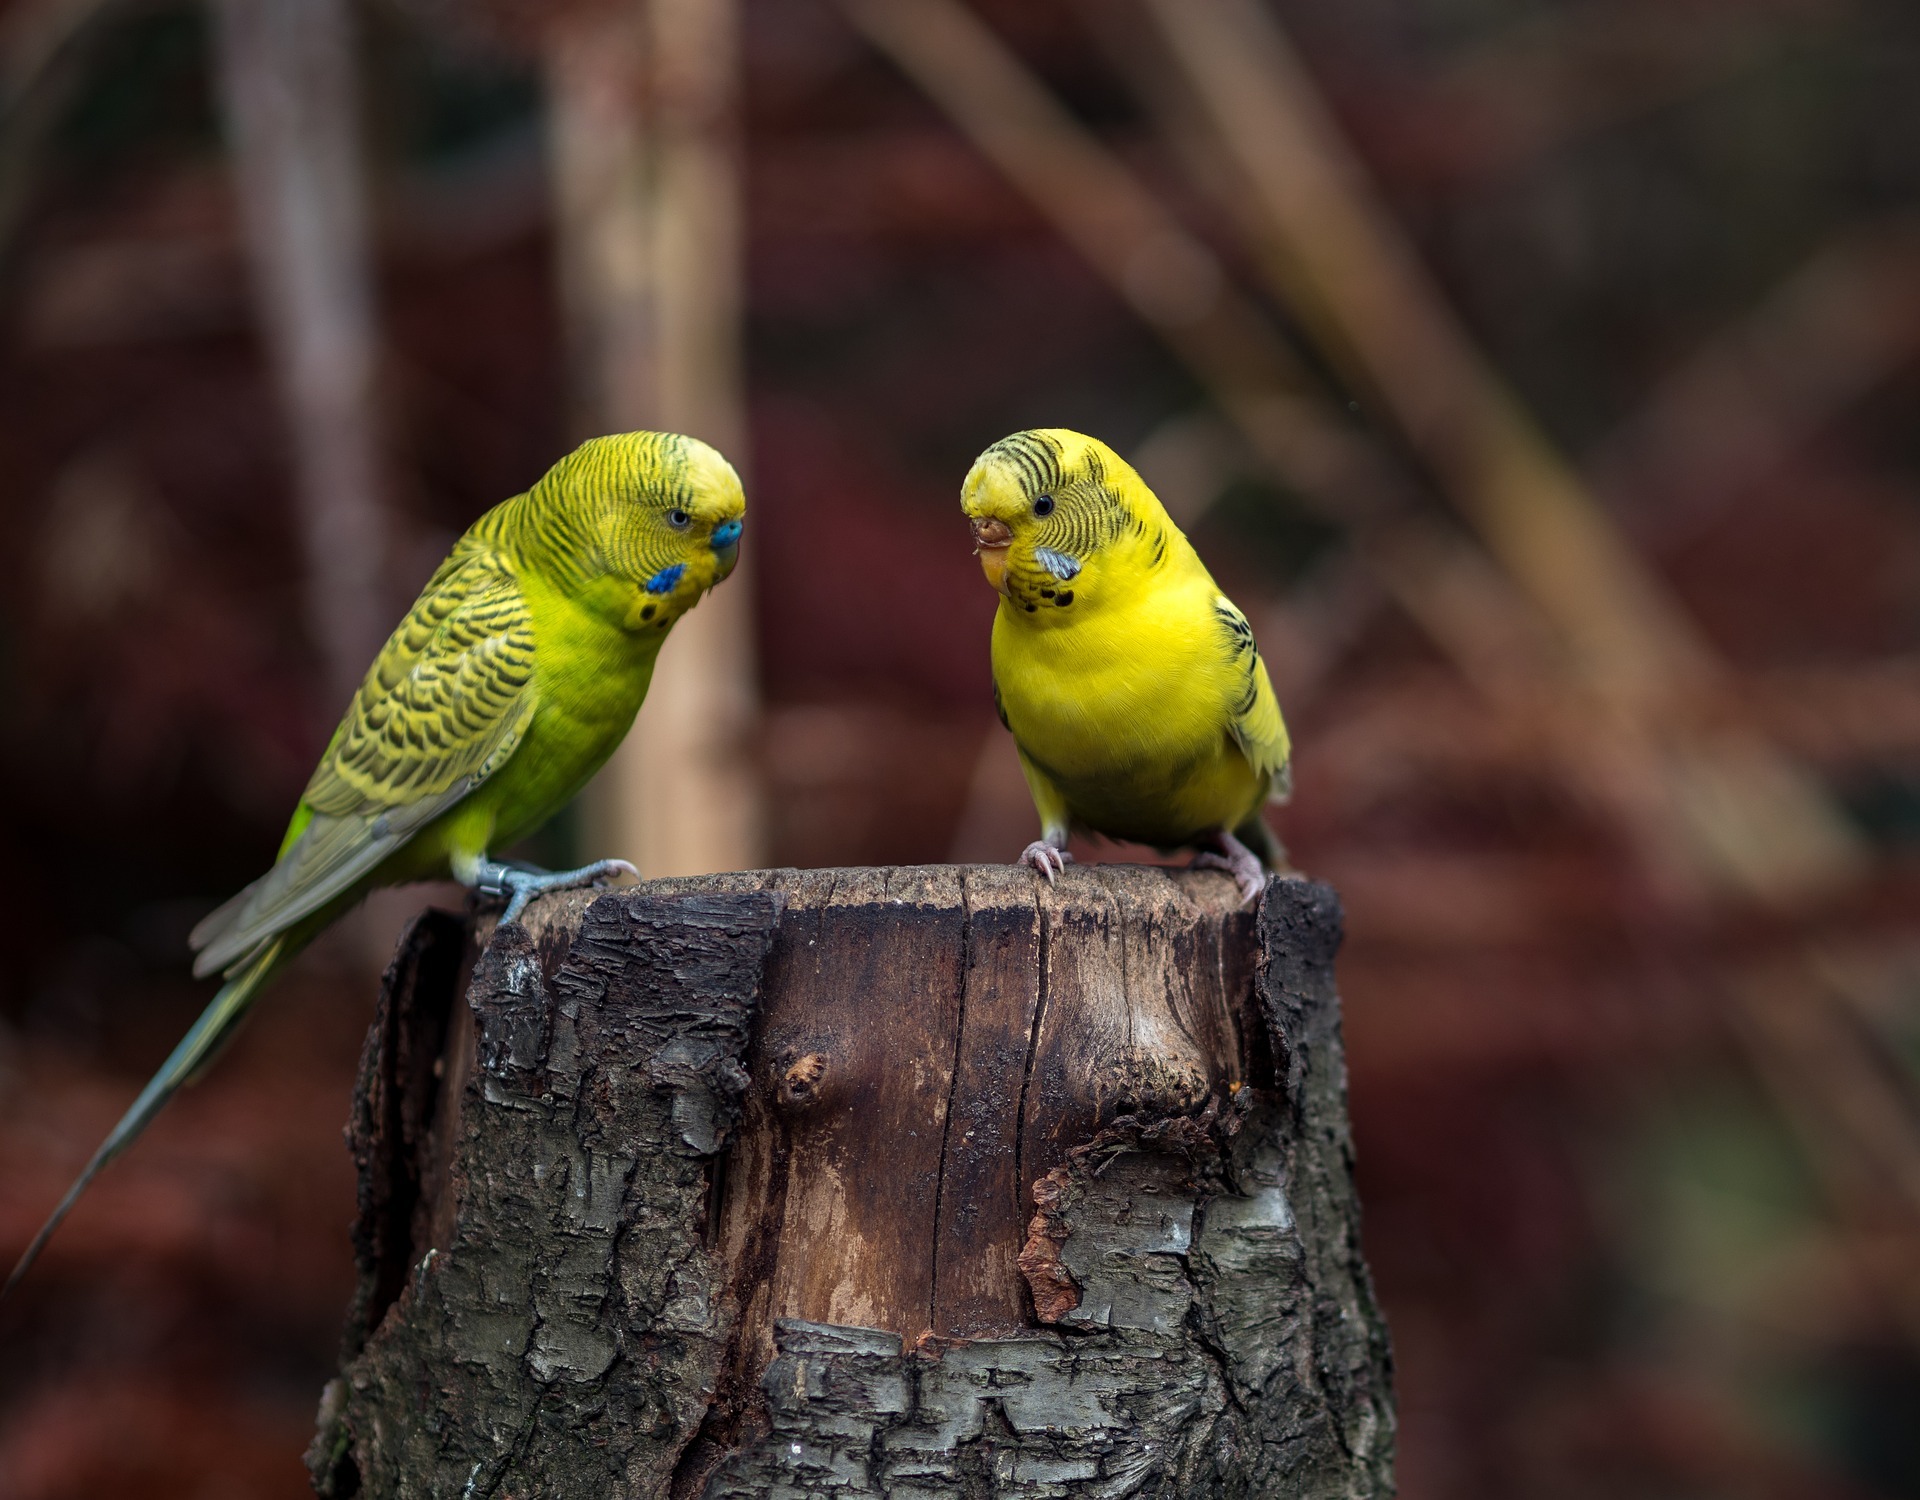 The owl centre’s budgies live alongside the new arrival Louie